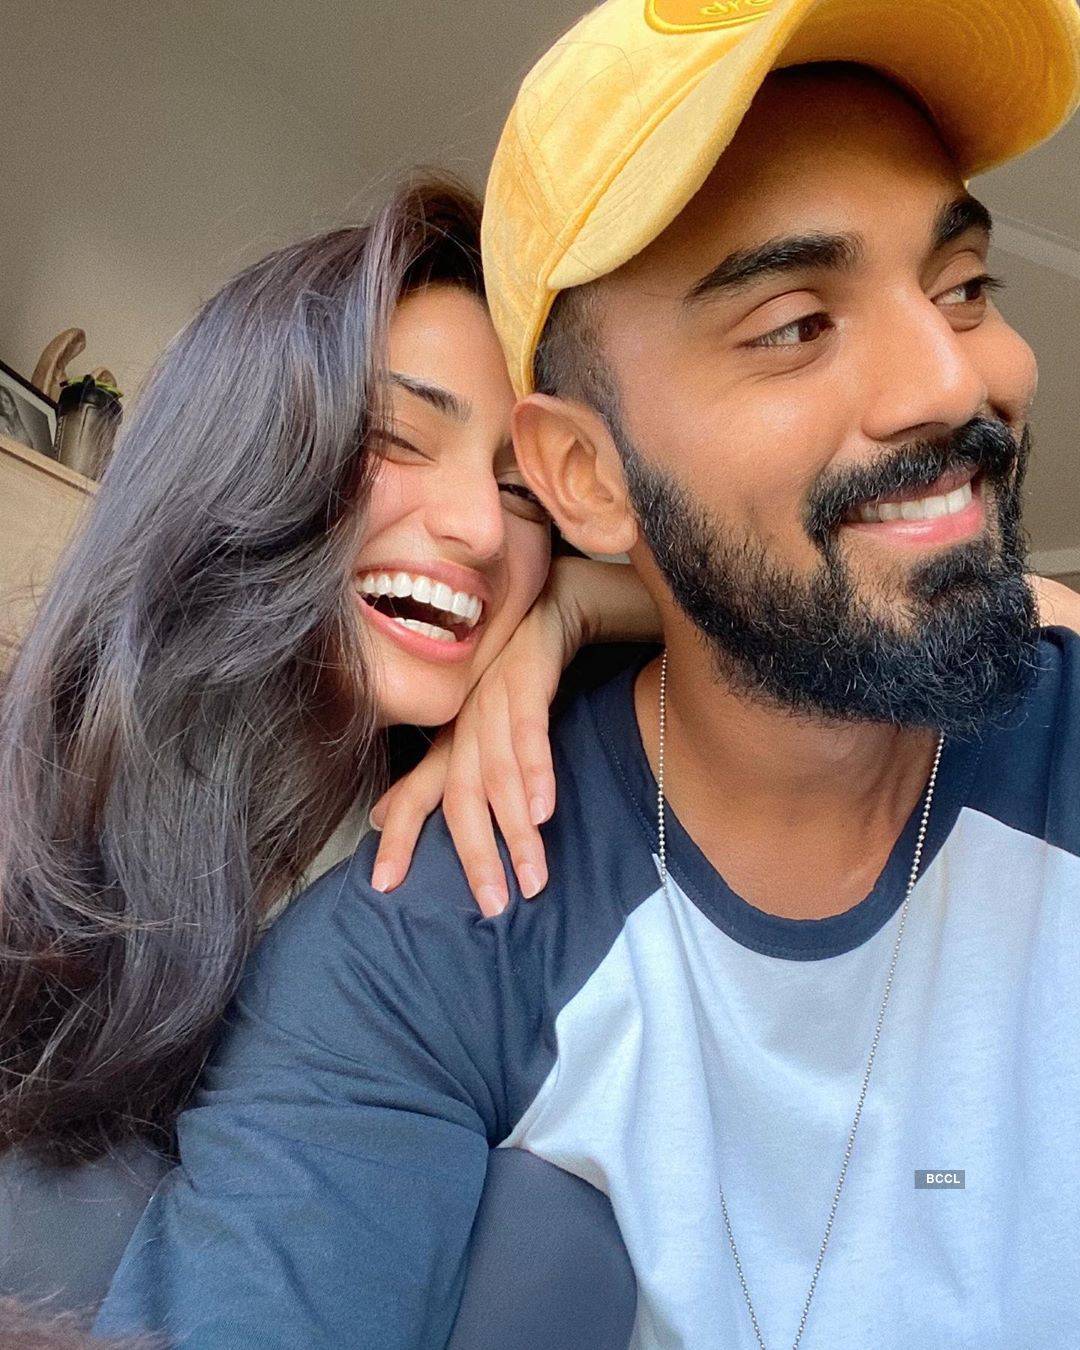 This adorable picture of KL Rahul with Athiya Shetty makes fans curious